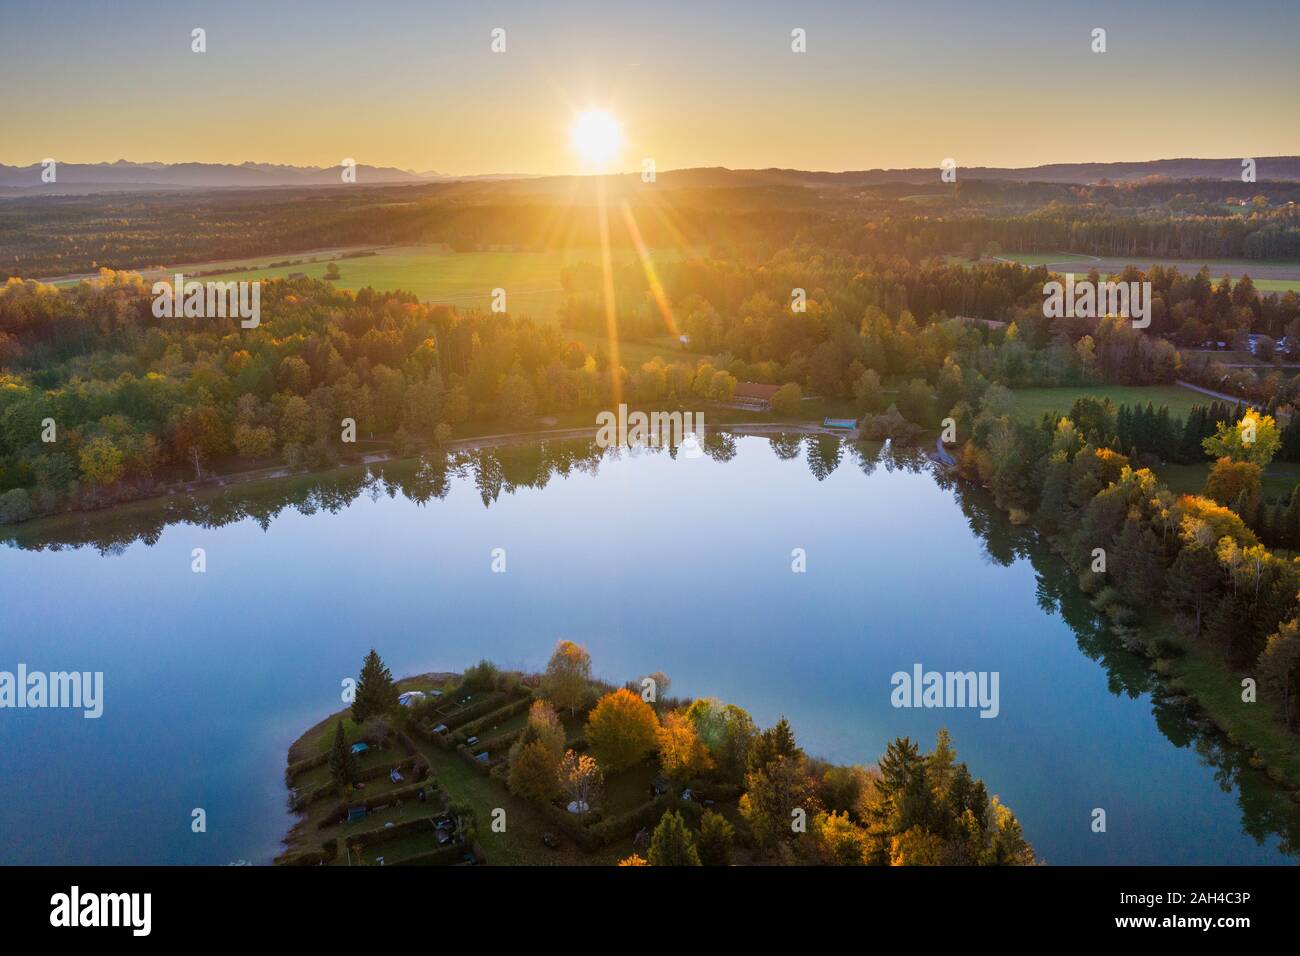 Germany, Bavaria, Upper Bavaria, Toelzer Land, Konigsdorf, Aerial view of Baggersee and forests at sunset Stock Photo